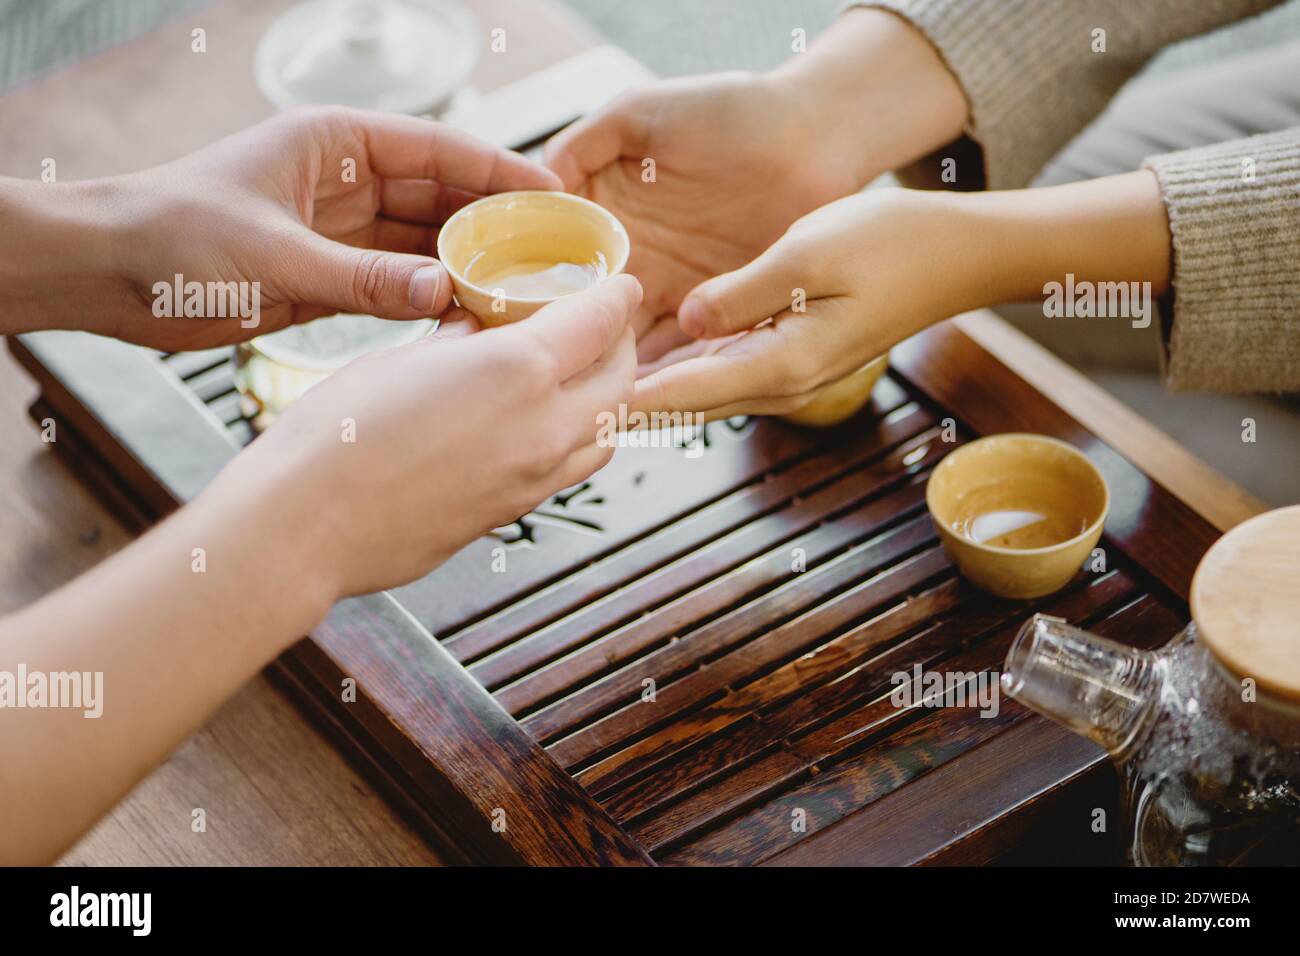 Closeup of male hands giving small porcelain cup with tea to female during a tea ceremony. Stock Photo